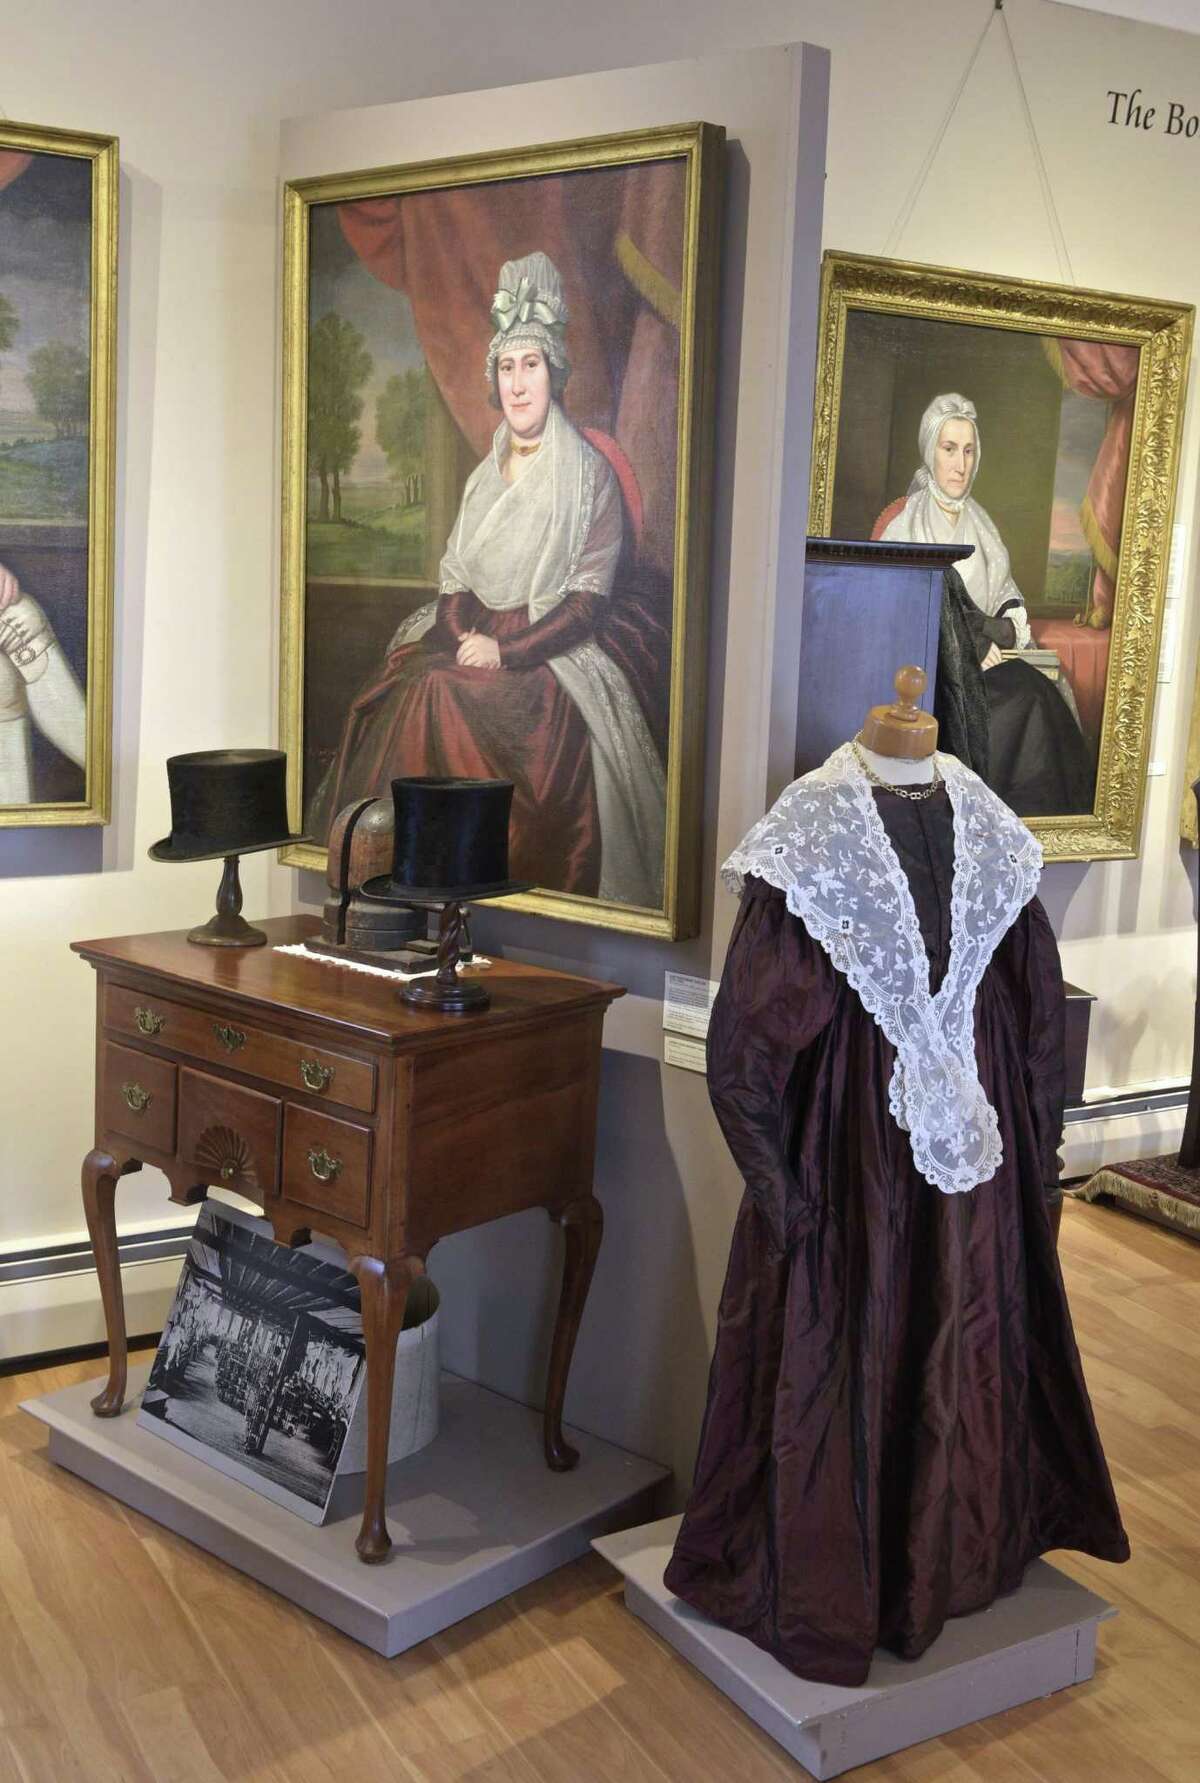 A burgundy red silk dress worn by Ann Northrop Taylor (1751-1810) on display and in a portrait displayed at the New Milford Historical Society in the society's newest exhibit. On display are select clothes and accessories from their permanent collection. Friday, March 22, 2019, in New Milford, Conn.